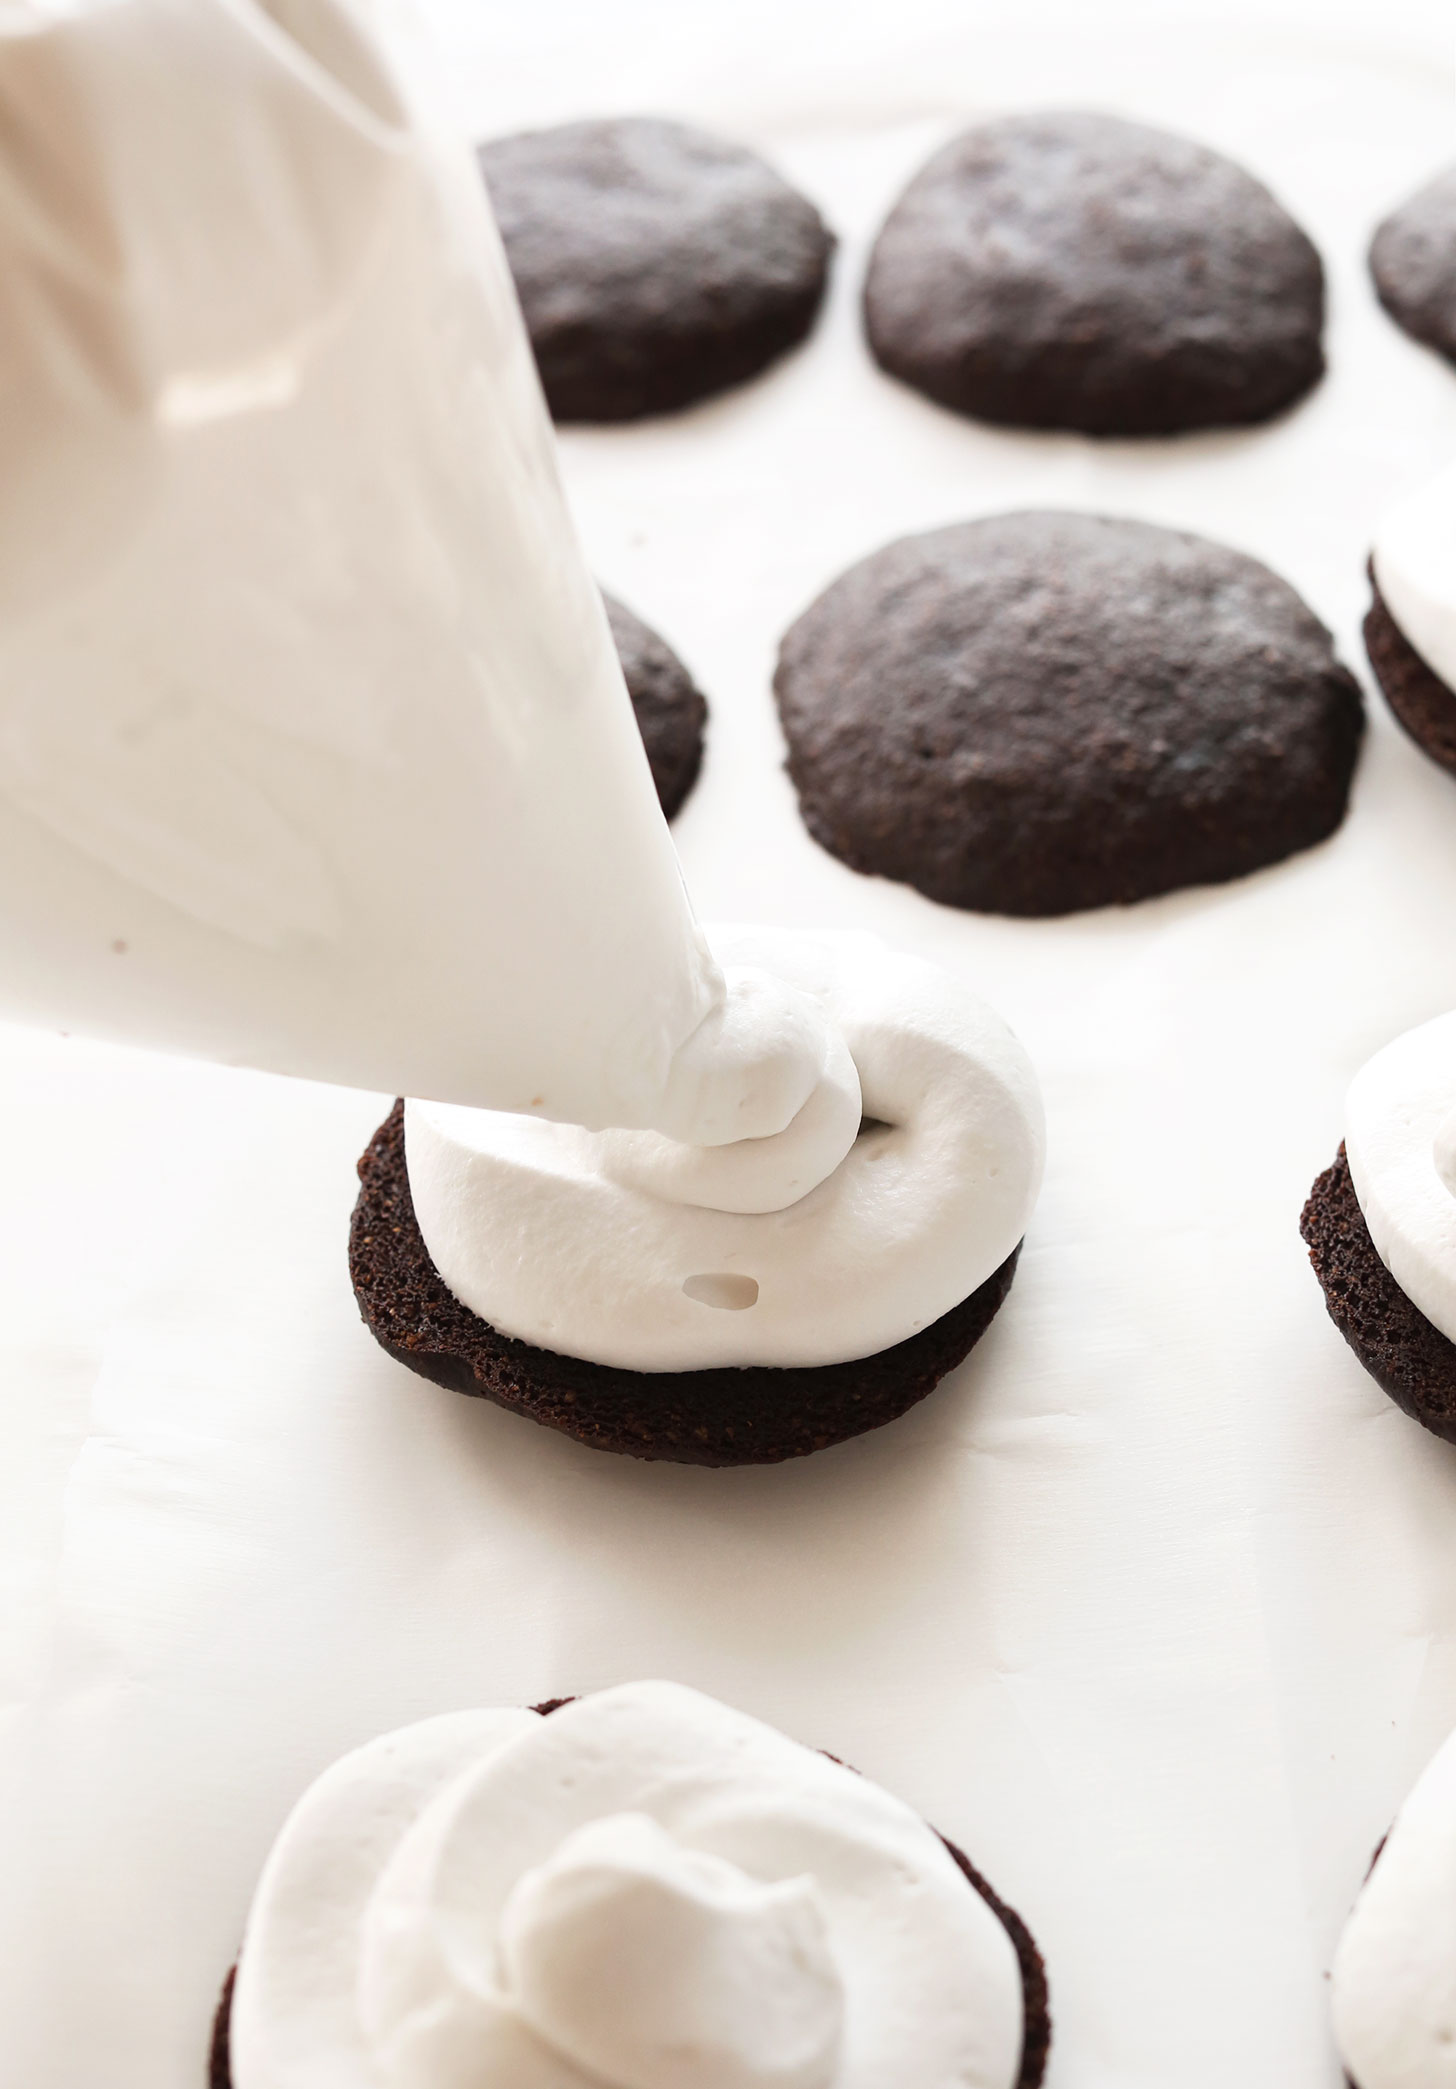 Using a pastry bag to swirl coconut whipped cream onto vegan whoopie pies